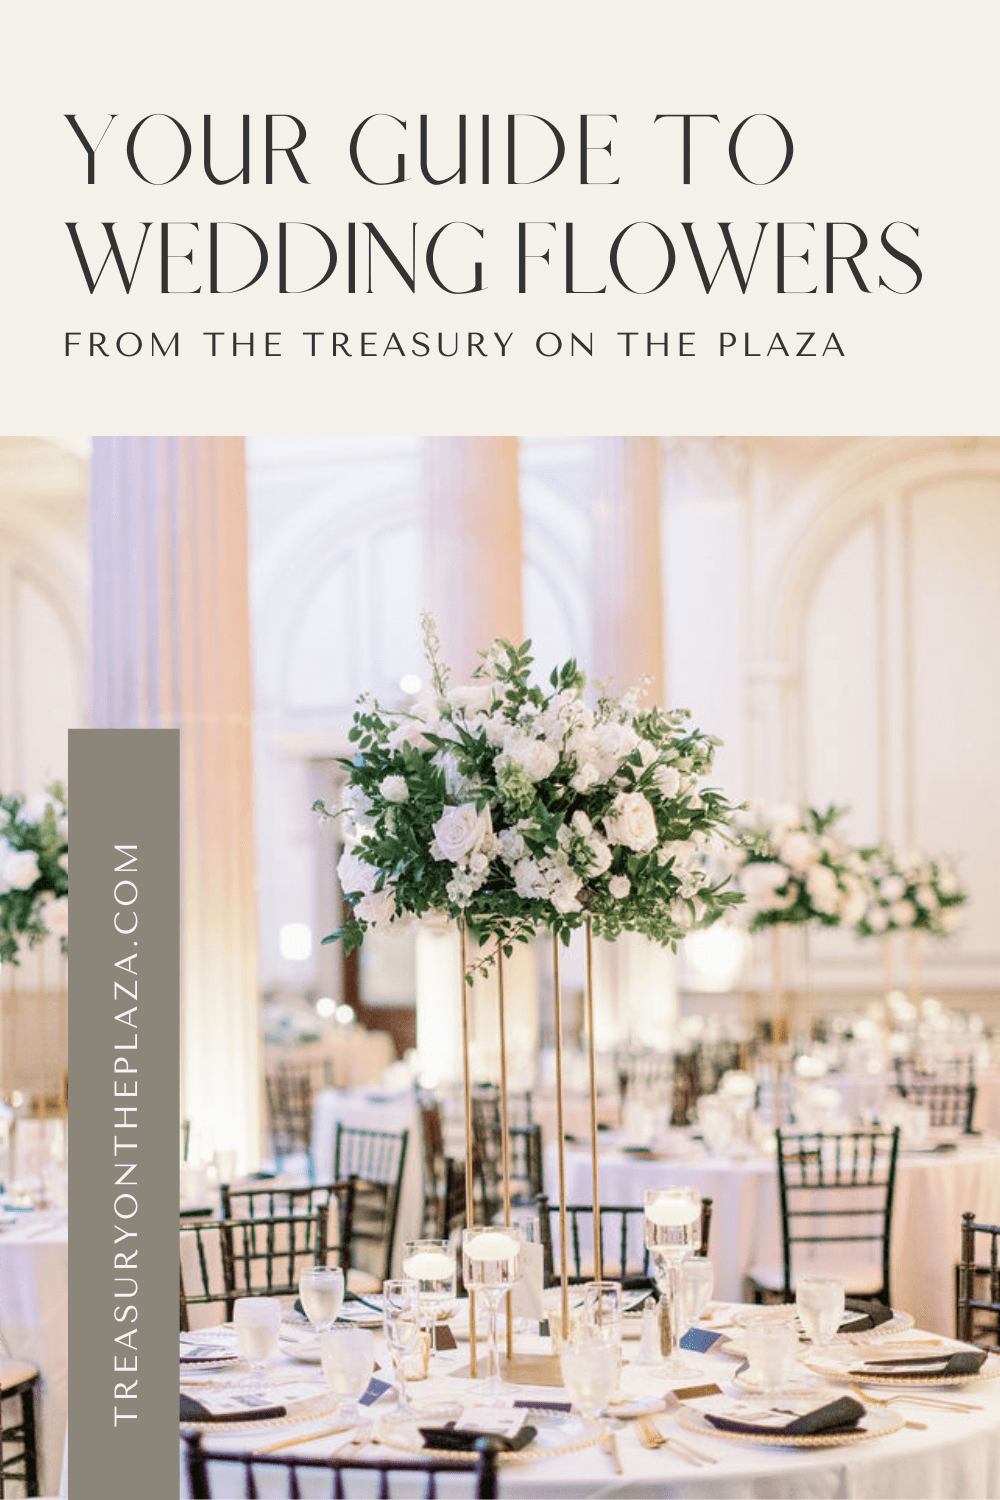 Guide to Wedding Flowers